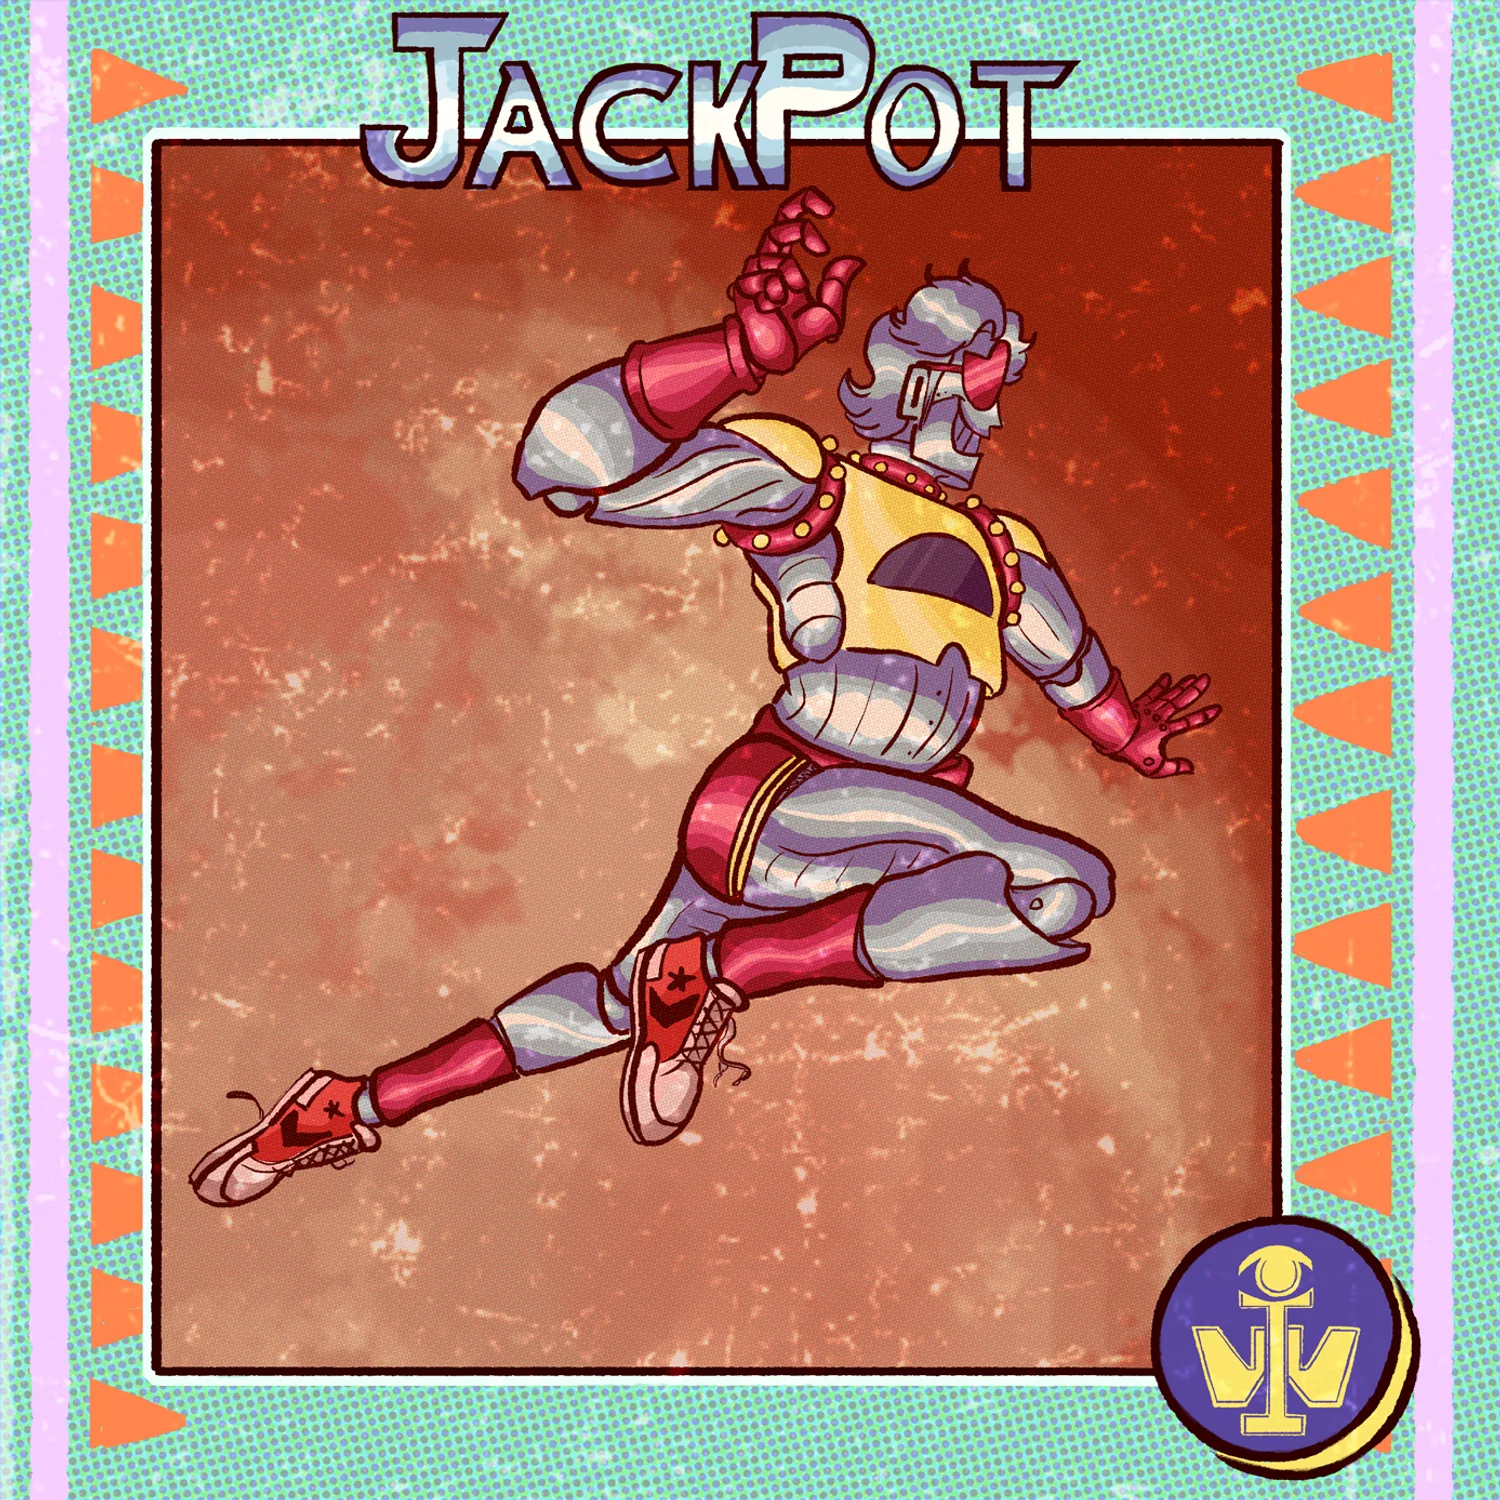 Digital illustration of a mock 80s magazine, the cover features a metallic man with the title JackPot in the header of the image